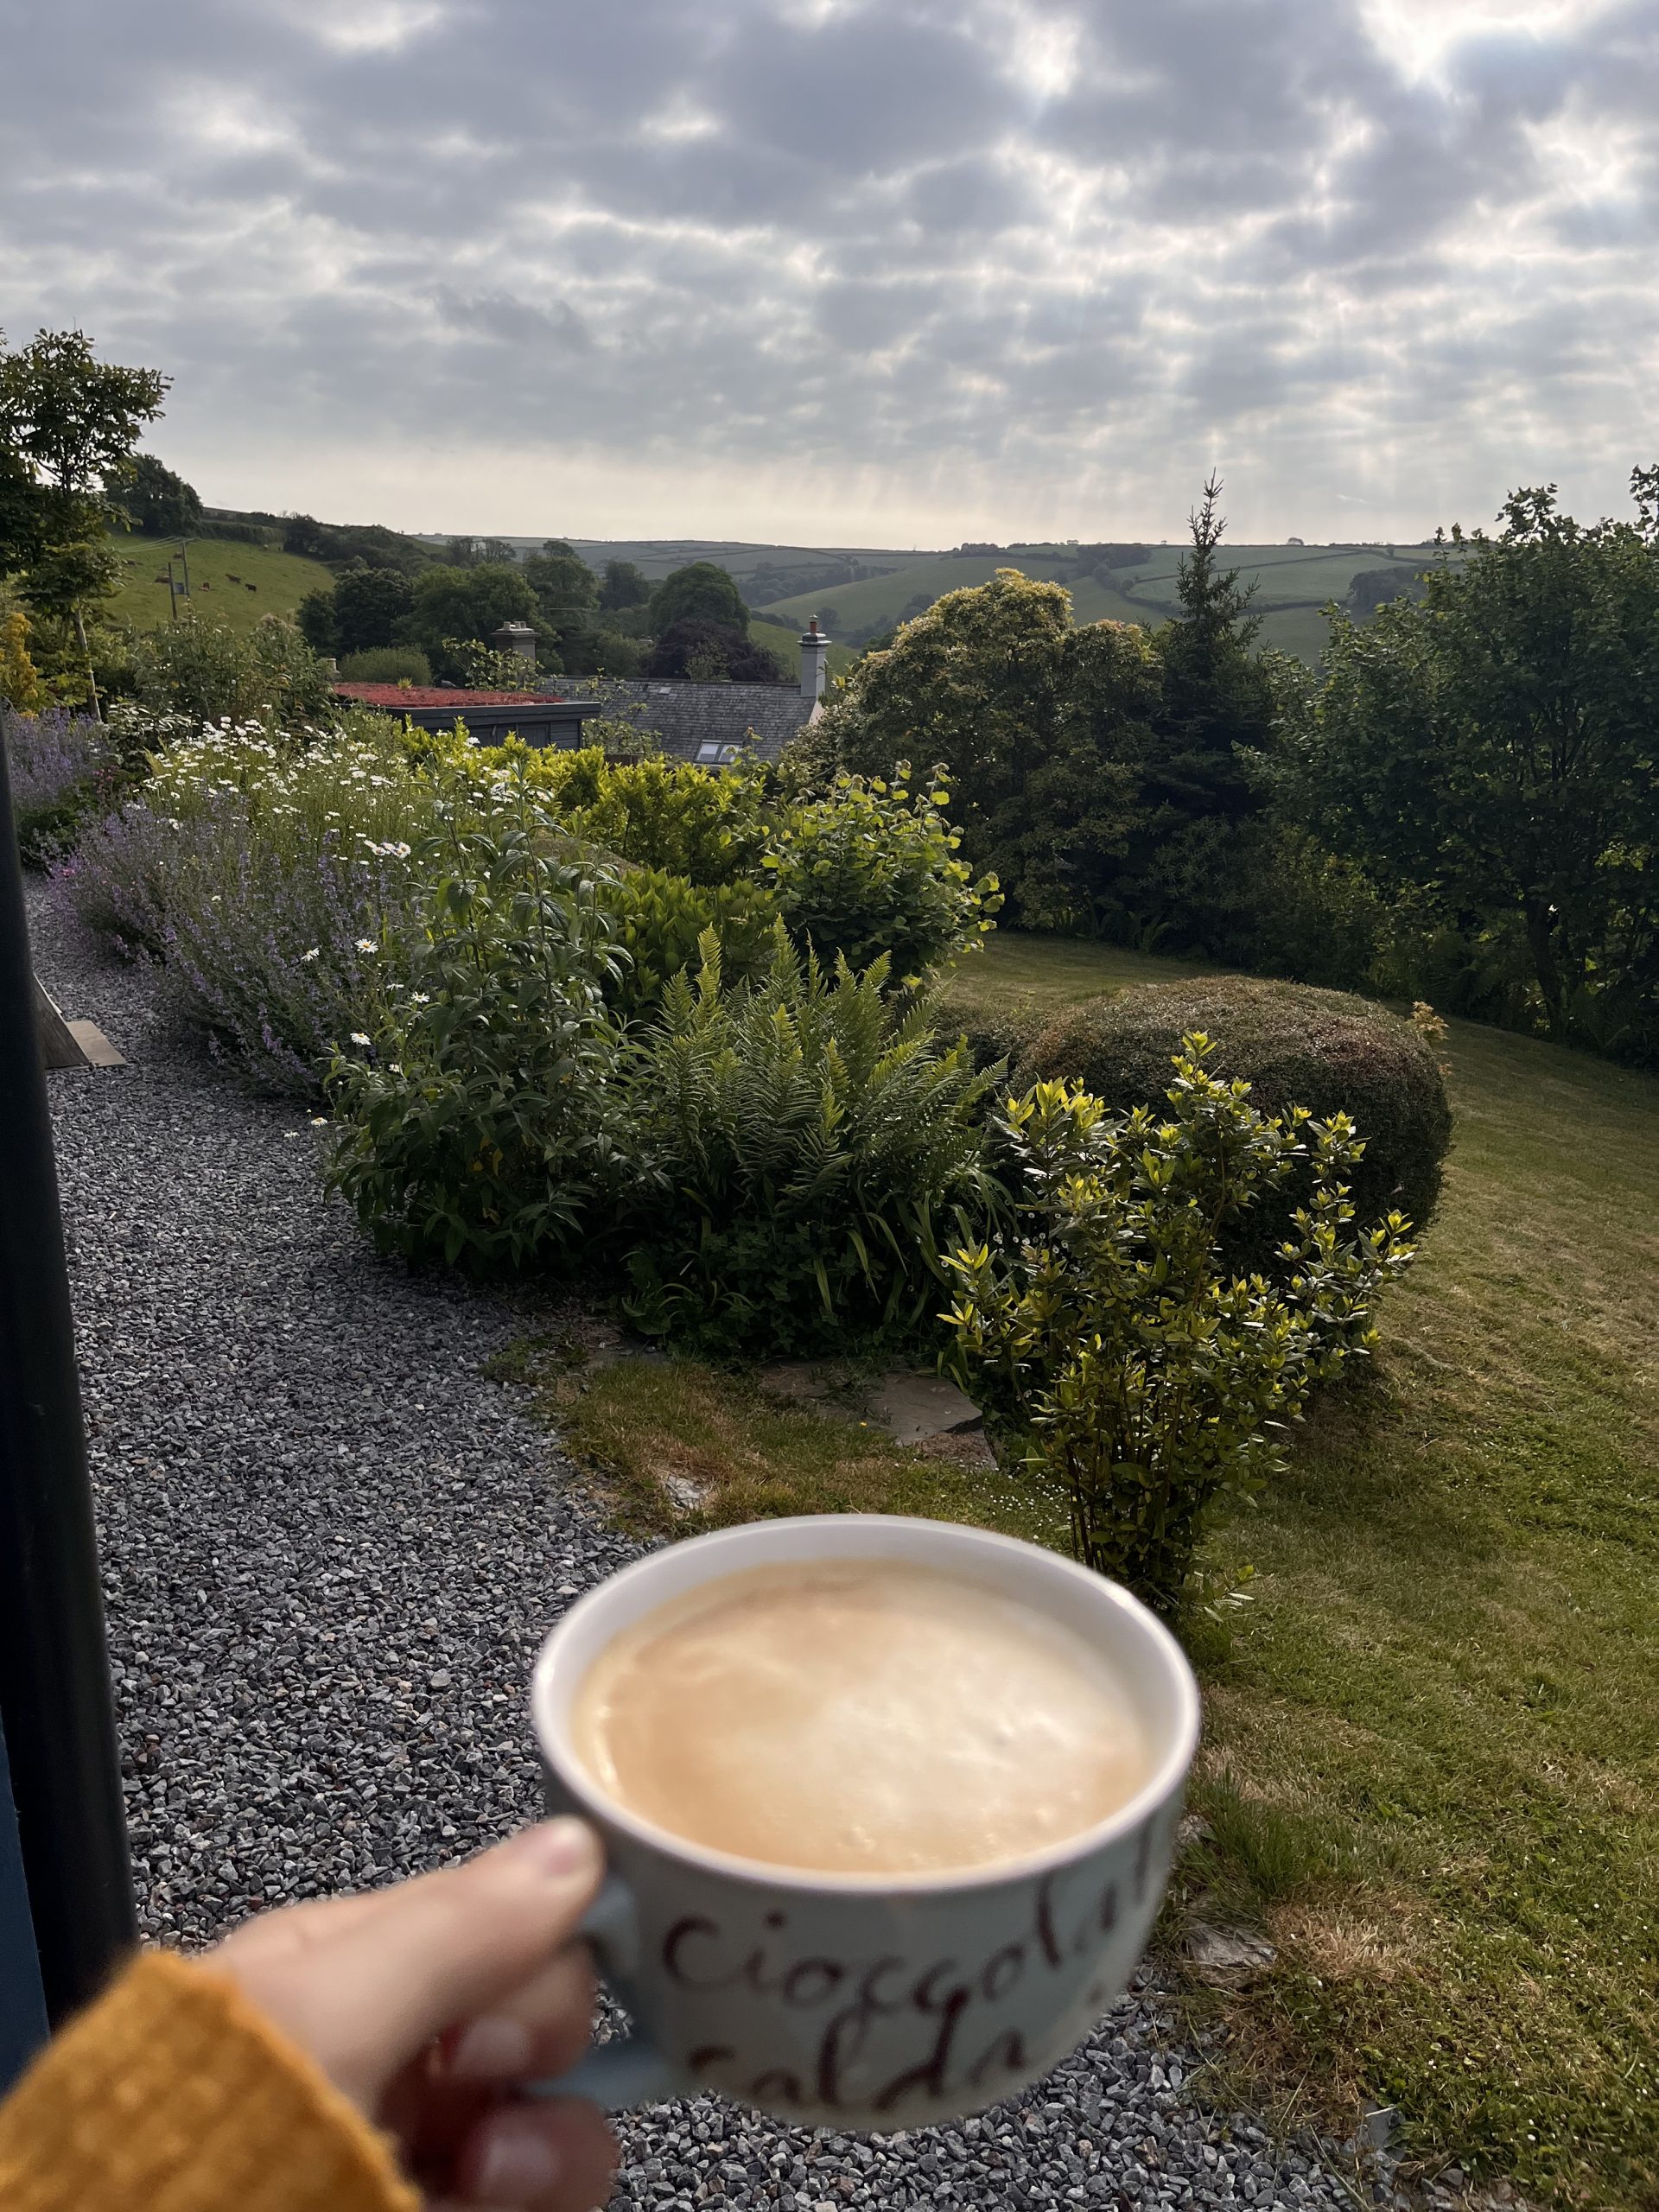 Coffee with a view at Bowden woods - one of the best places to stay in Devon